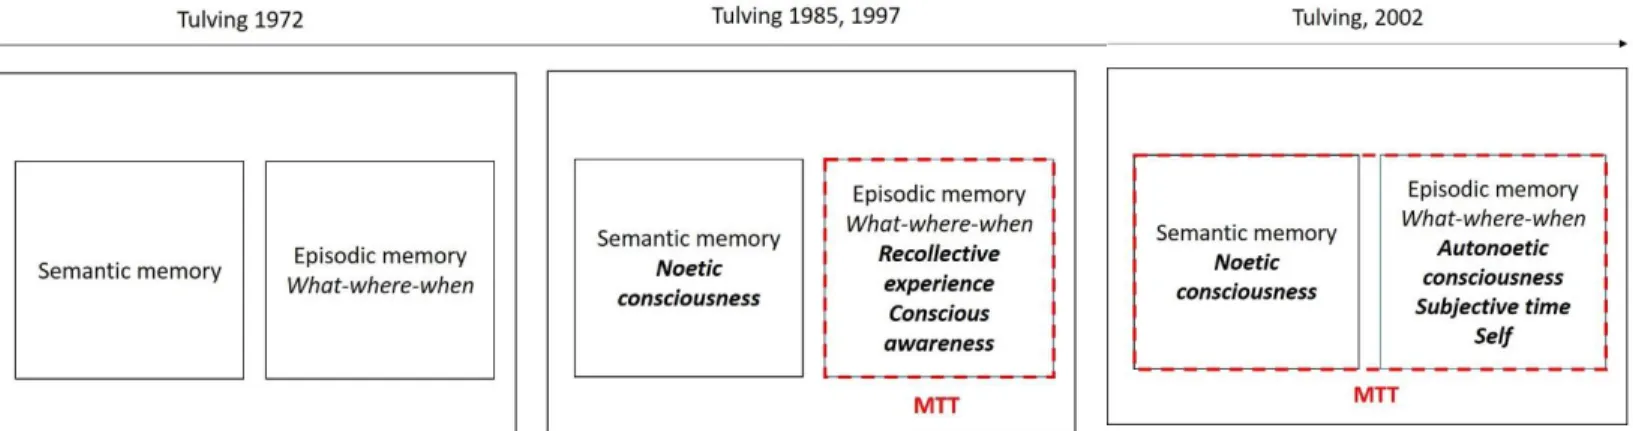 Figure 2 Evolution of the definition of episodic memory by Tulving from its conception in 1972